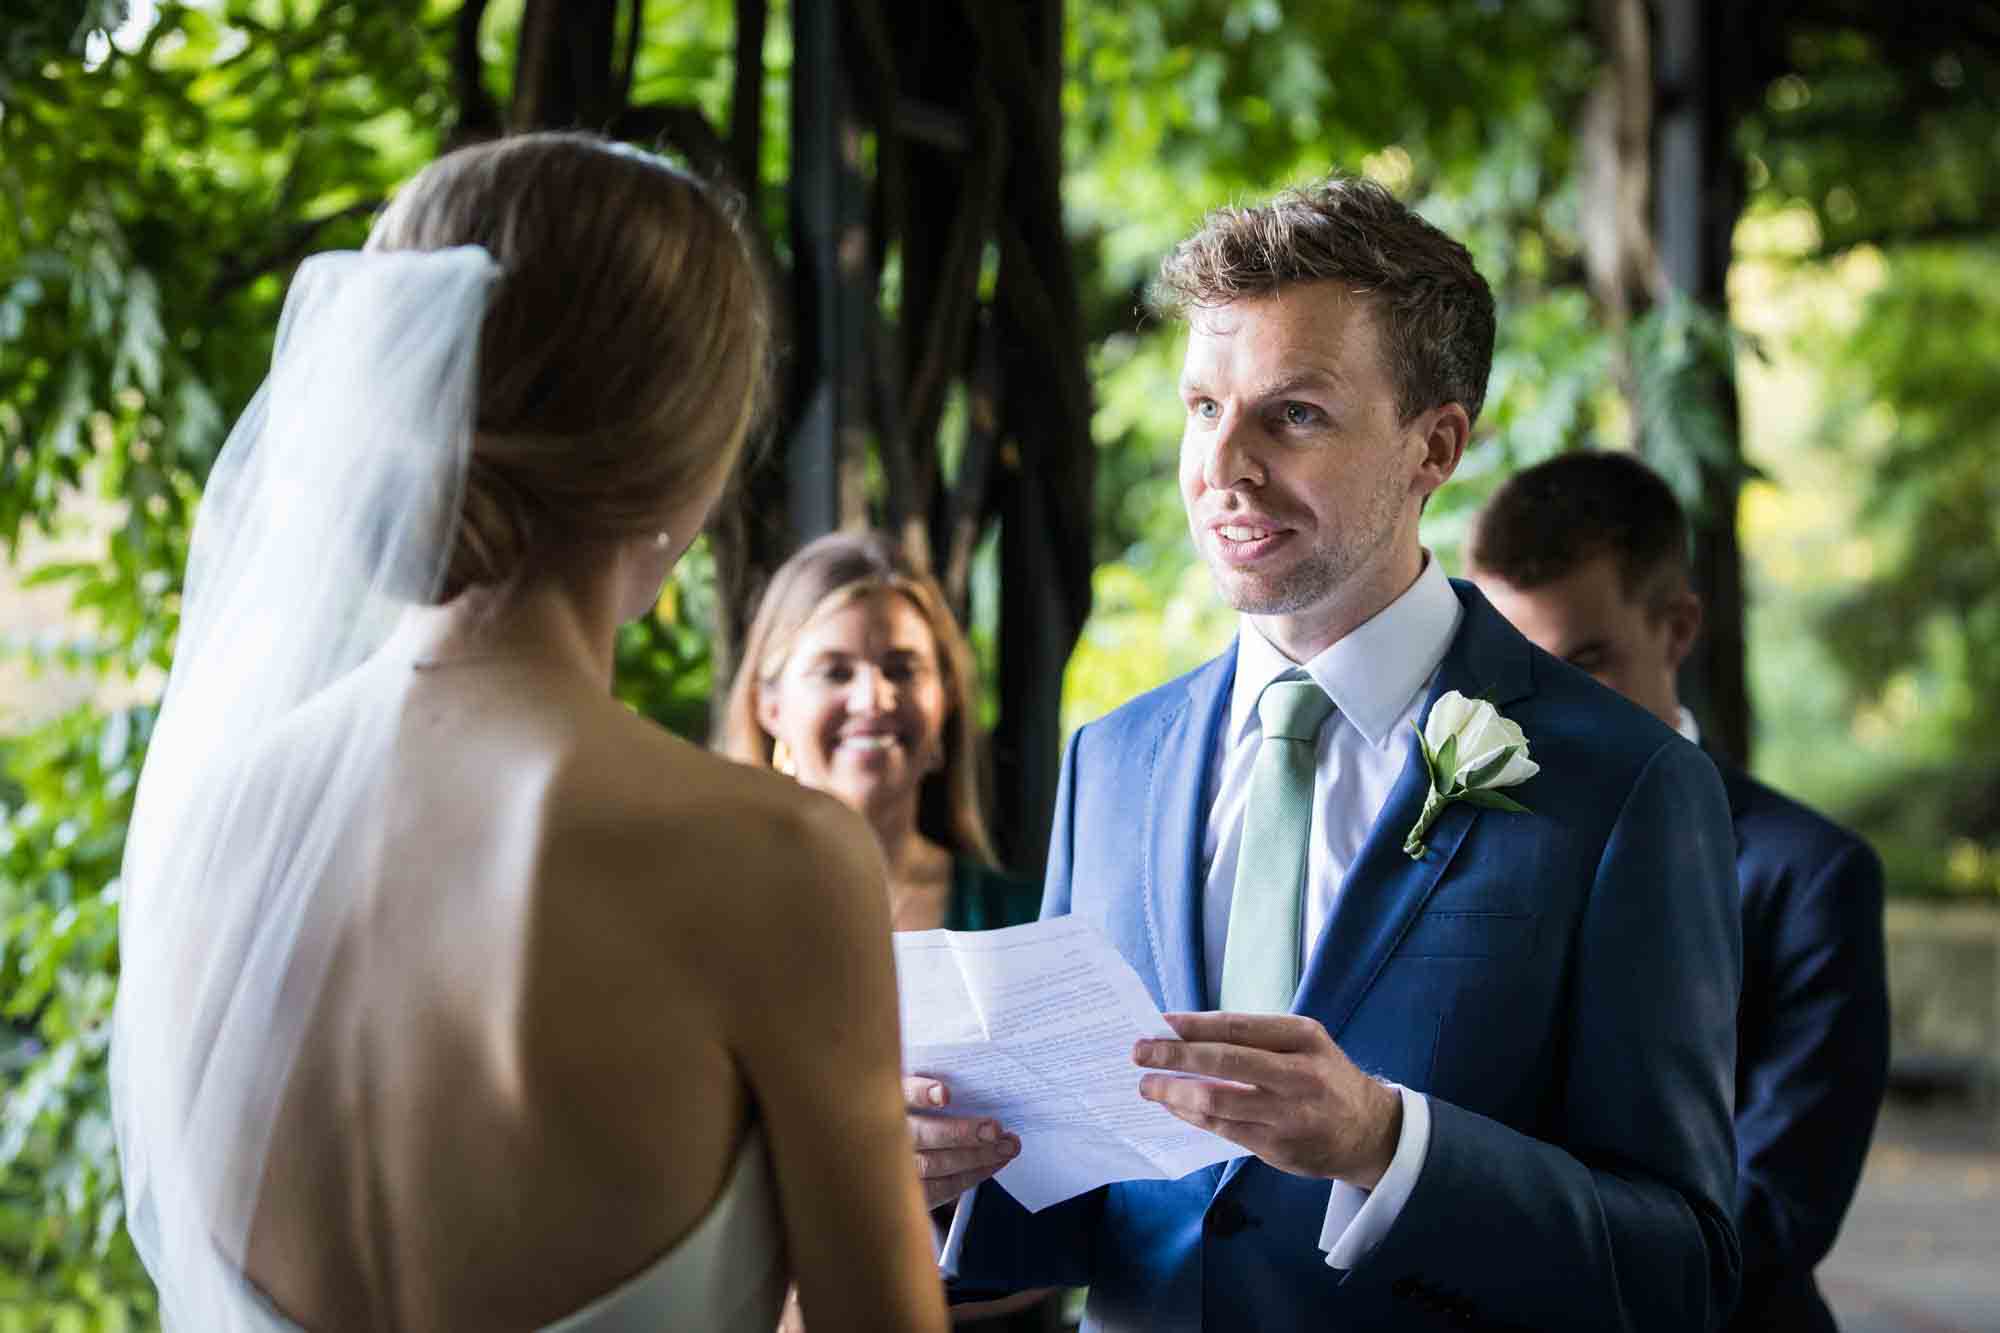 Groom holding paper and saying vows to bride during a Conservatory Garden wedding in Central Park